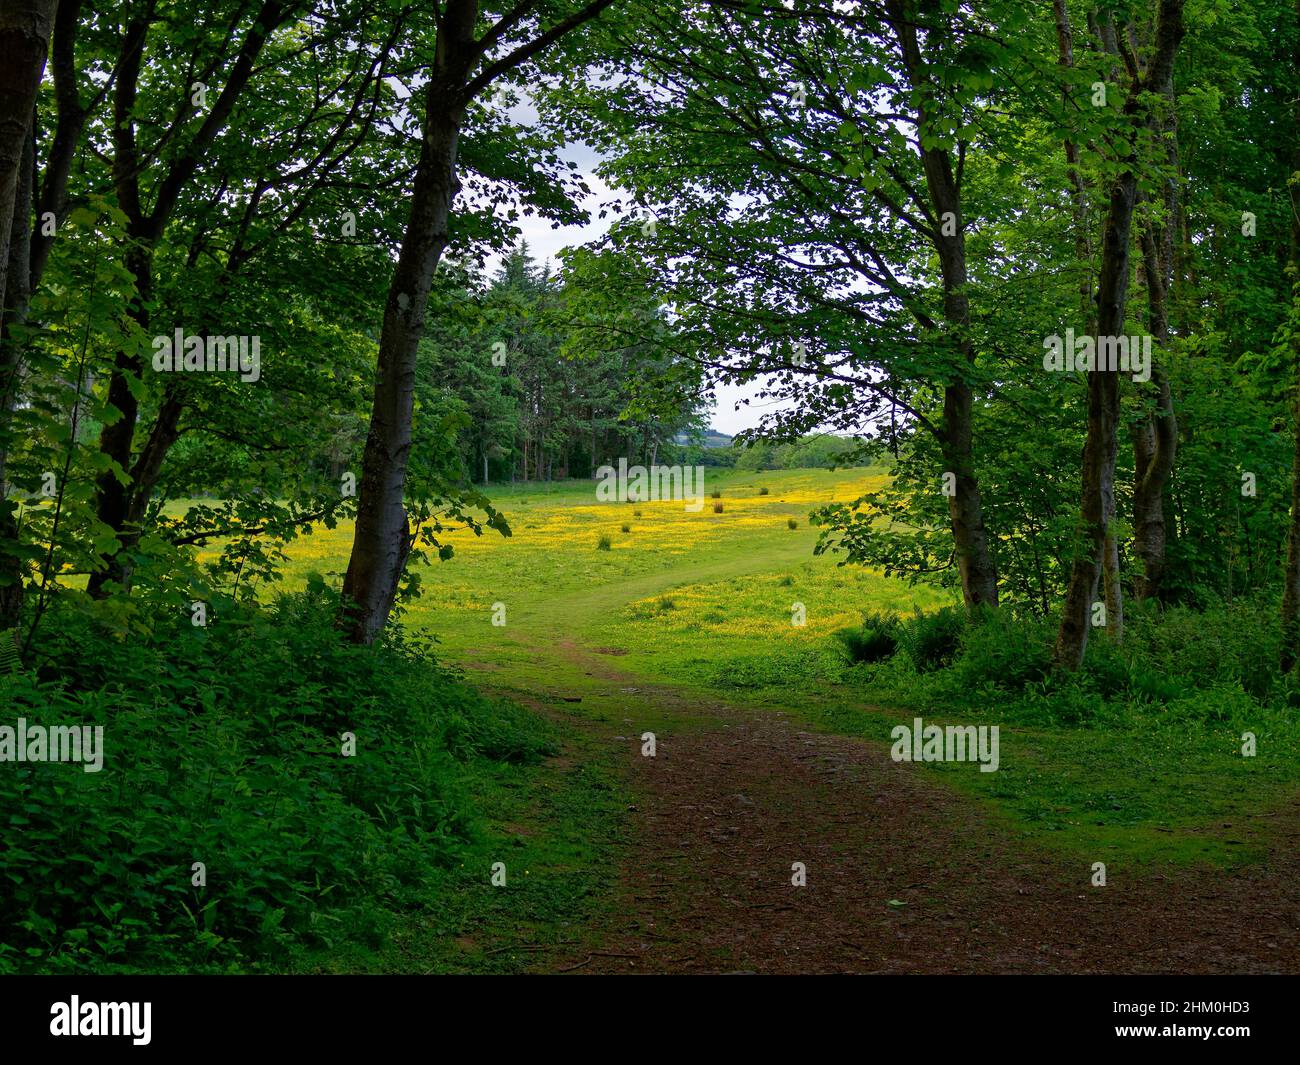 Coming out of Dunnottar Woods into a small grassed Meadow with wild yellow Buttercups growing in the grass, and a path passing through. Stock Photo